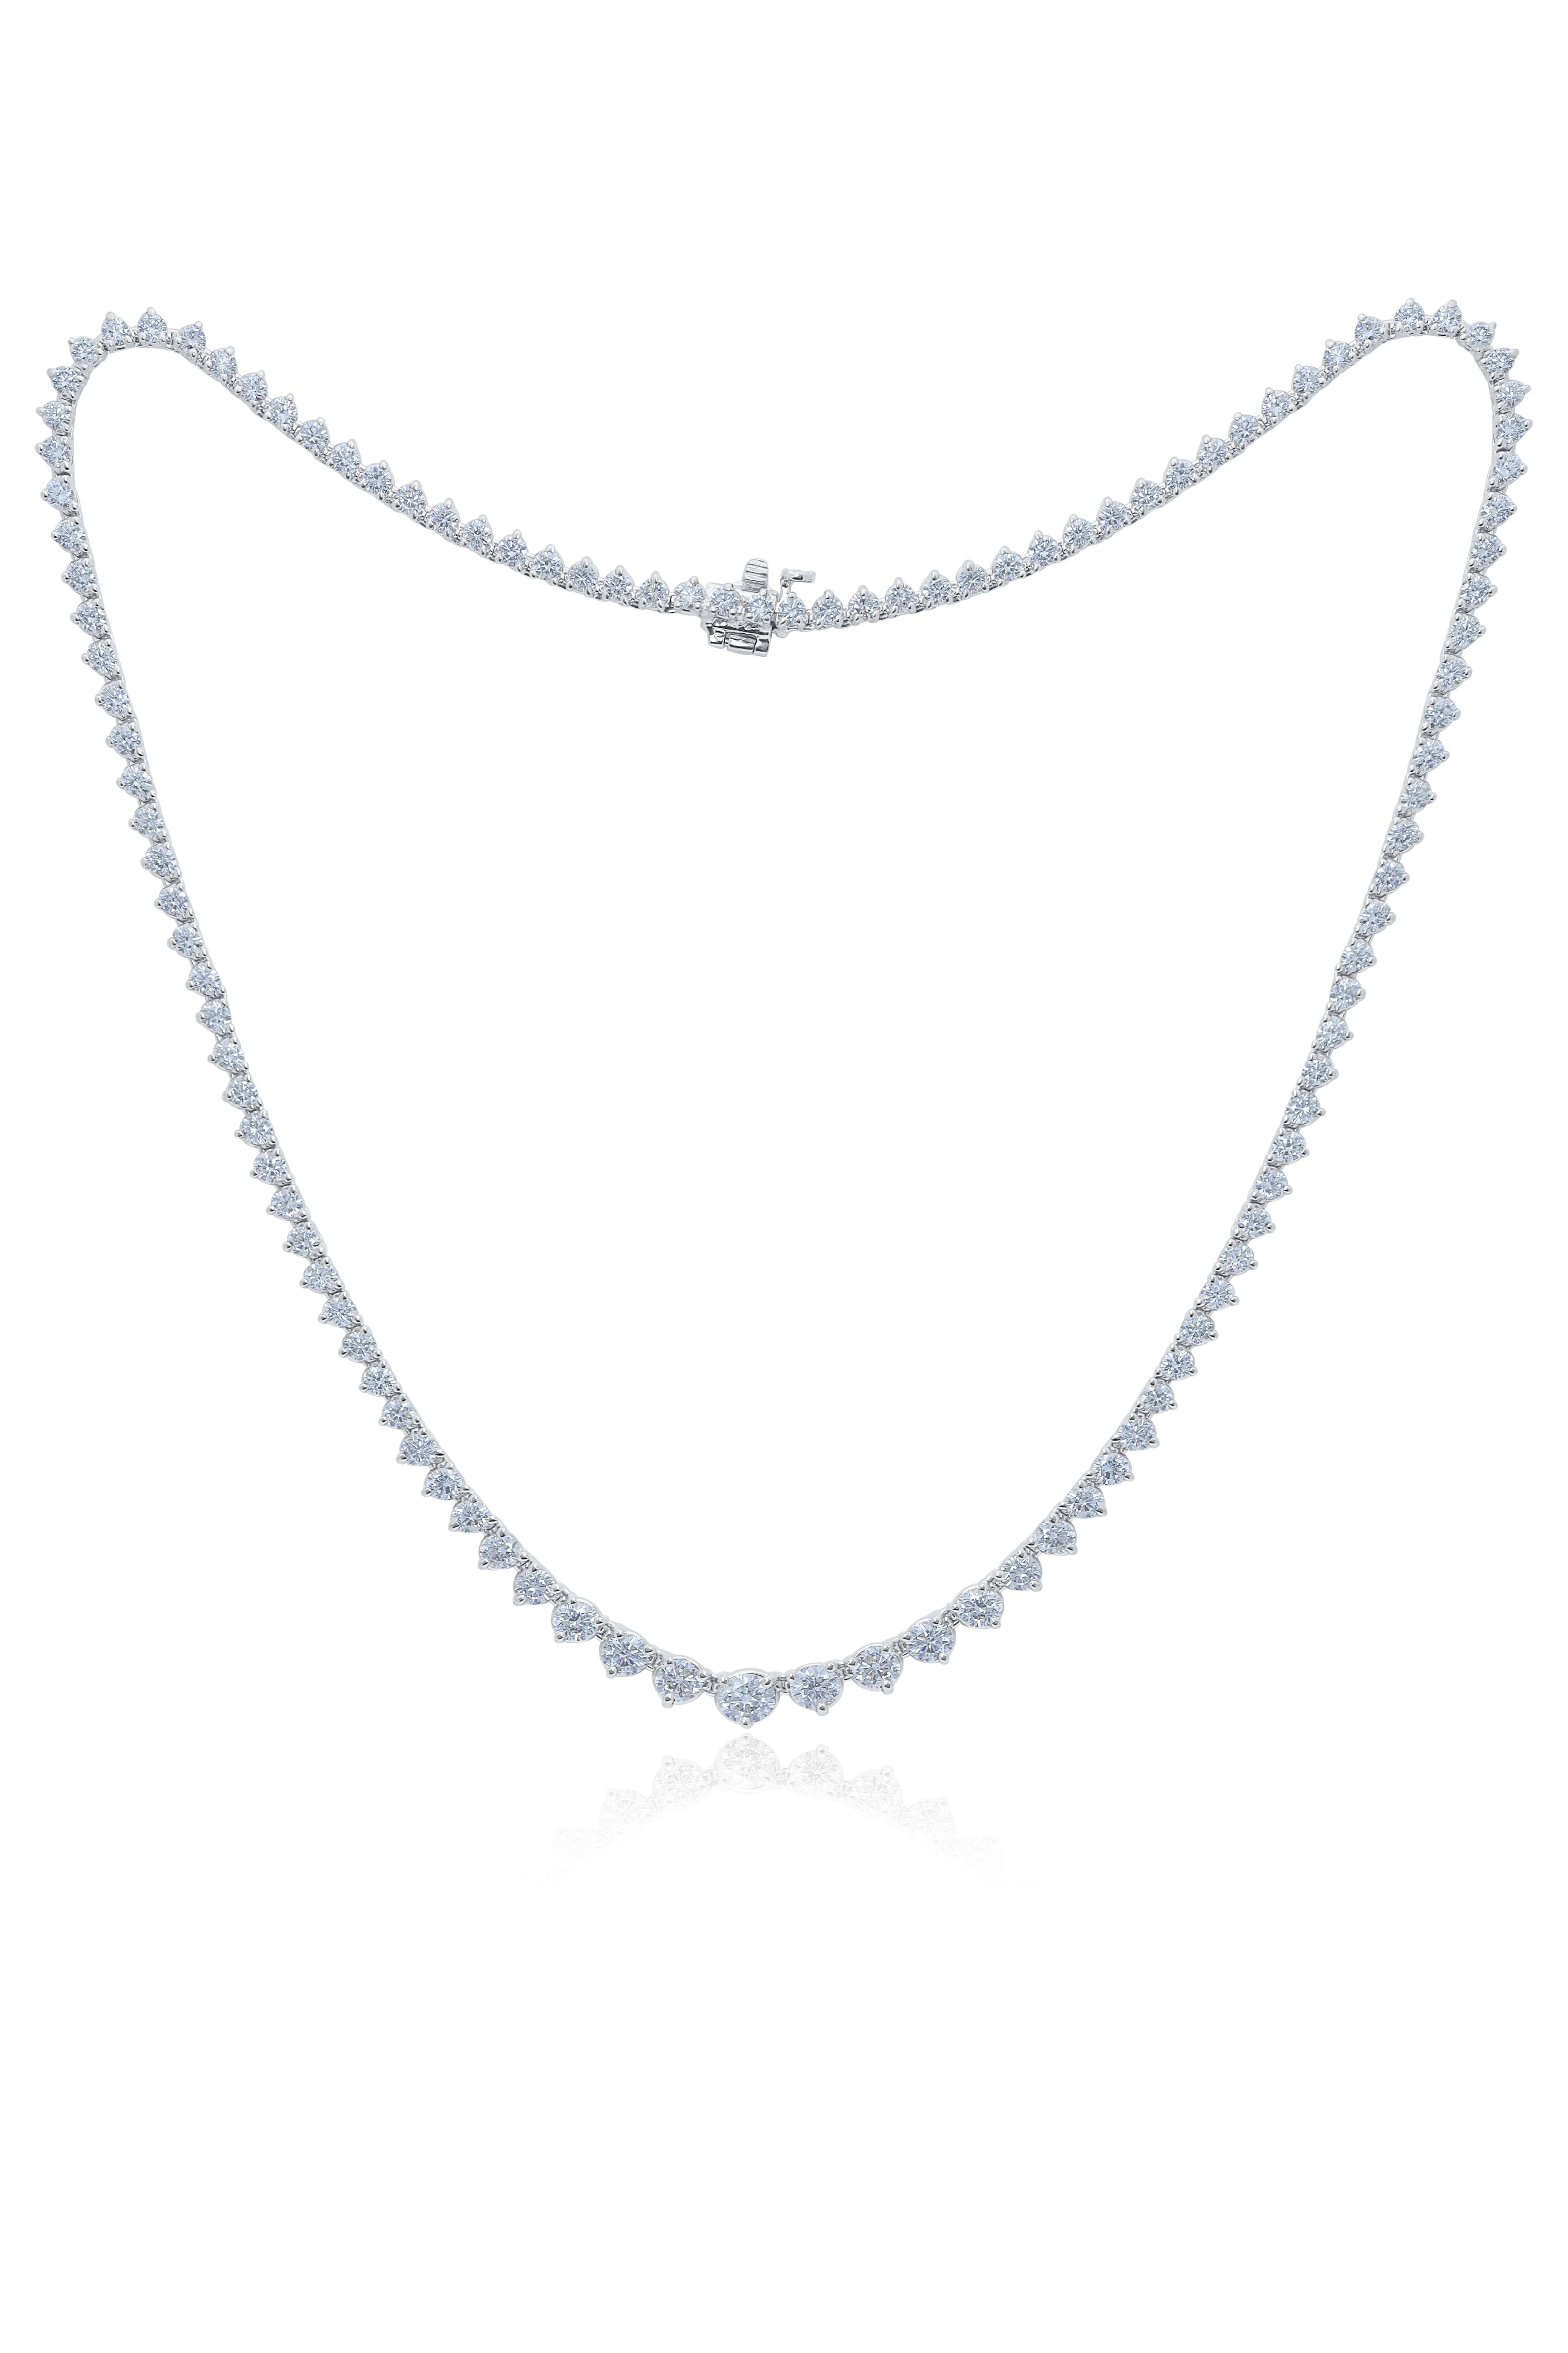 Modern Diana M. 18kt White Gold Graduated Riviera Tennis  Necklace  16.35 cts 16.5